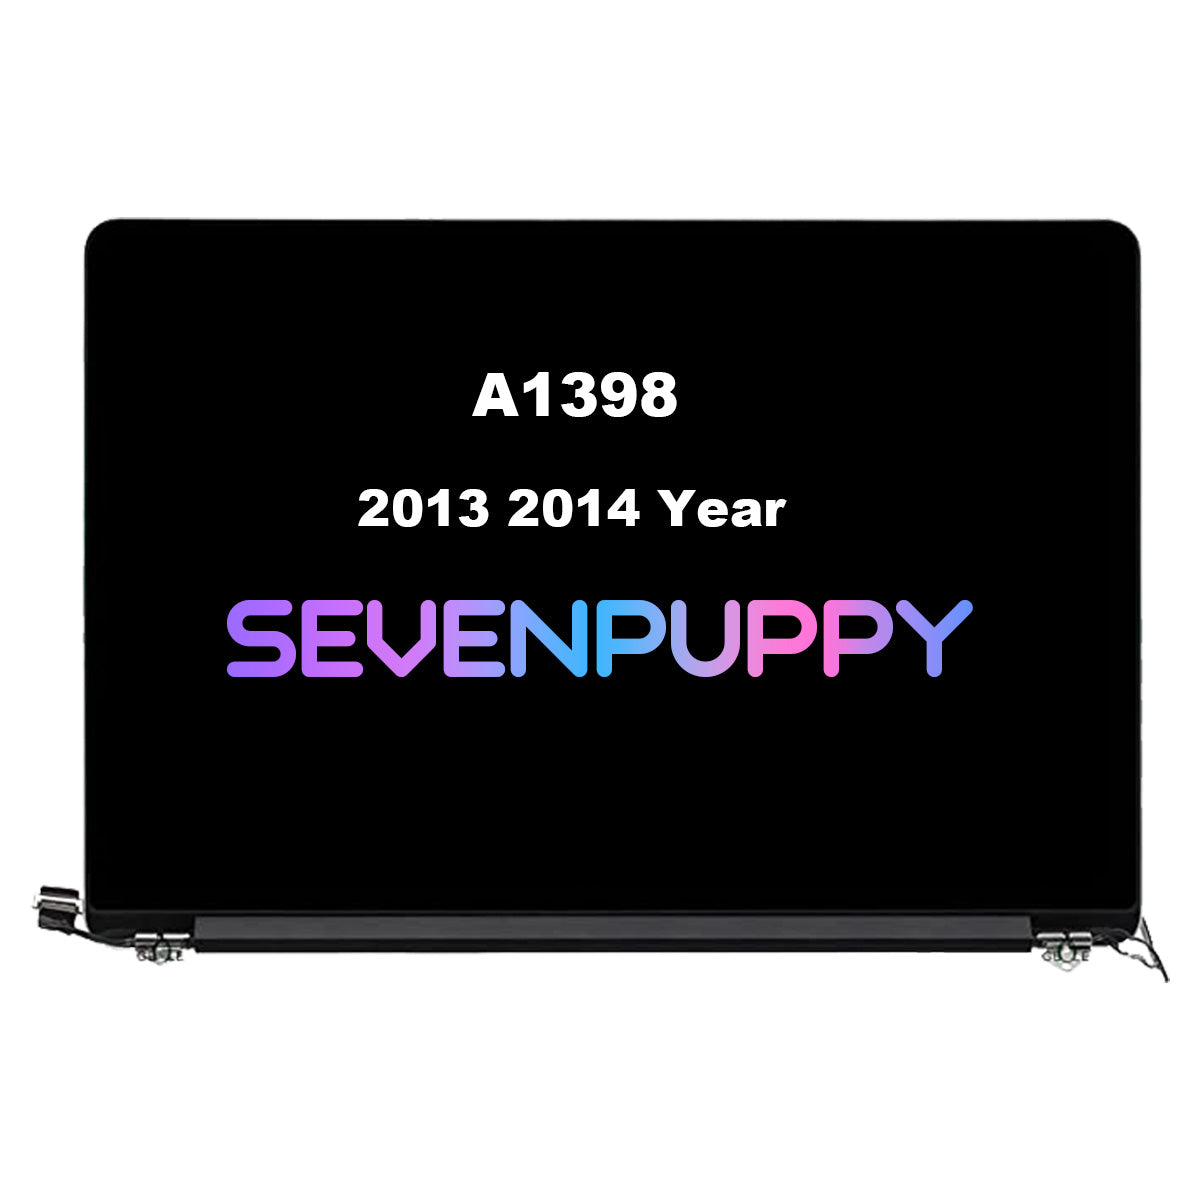 SEVEN PUPPY Brand NEW For MacBook Pro 15“ A1398 2013 2014 Year Retina Full LCD Display Screen Assembly Replacement